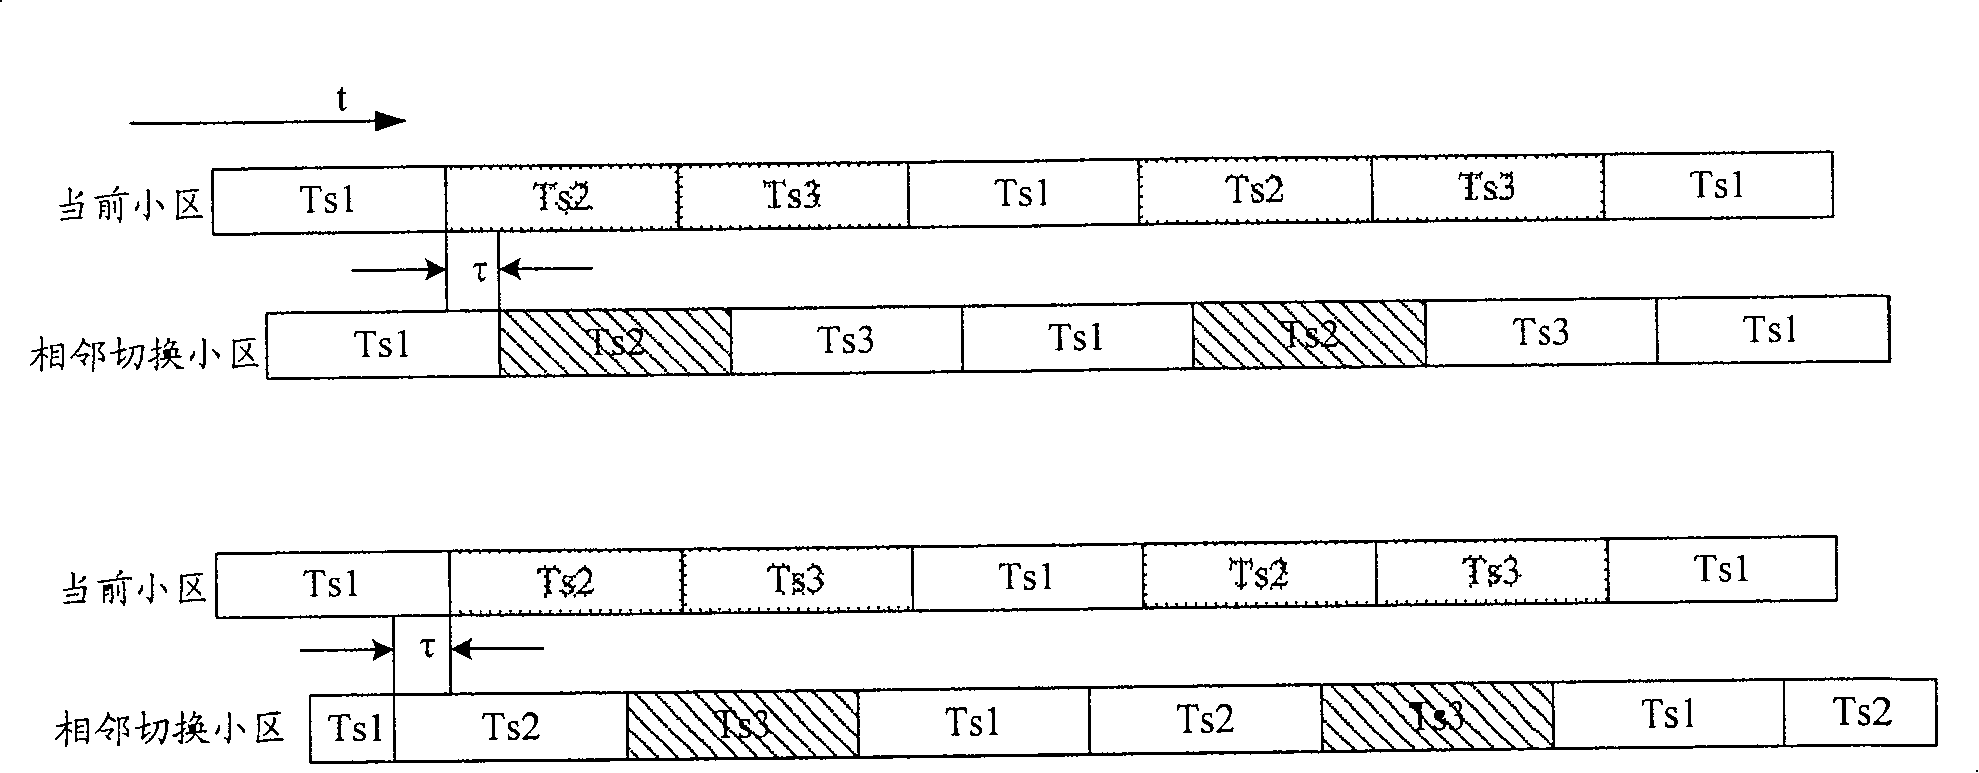 Method for realizing intercell soft switching in OFDM system